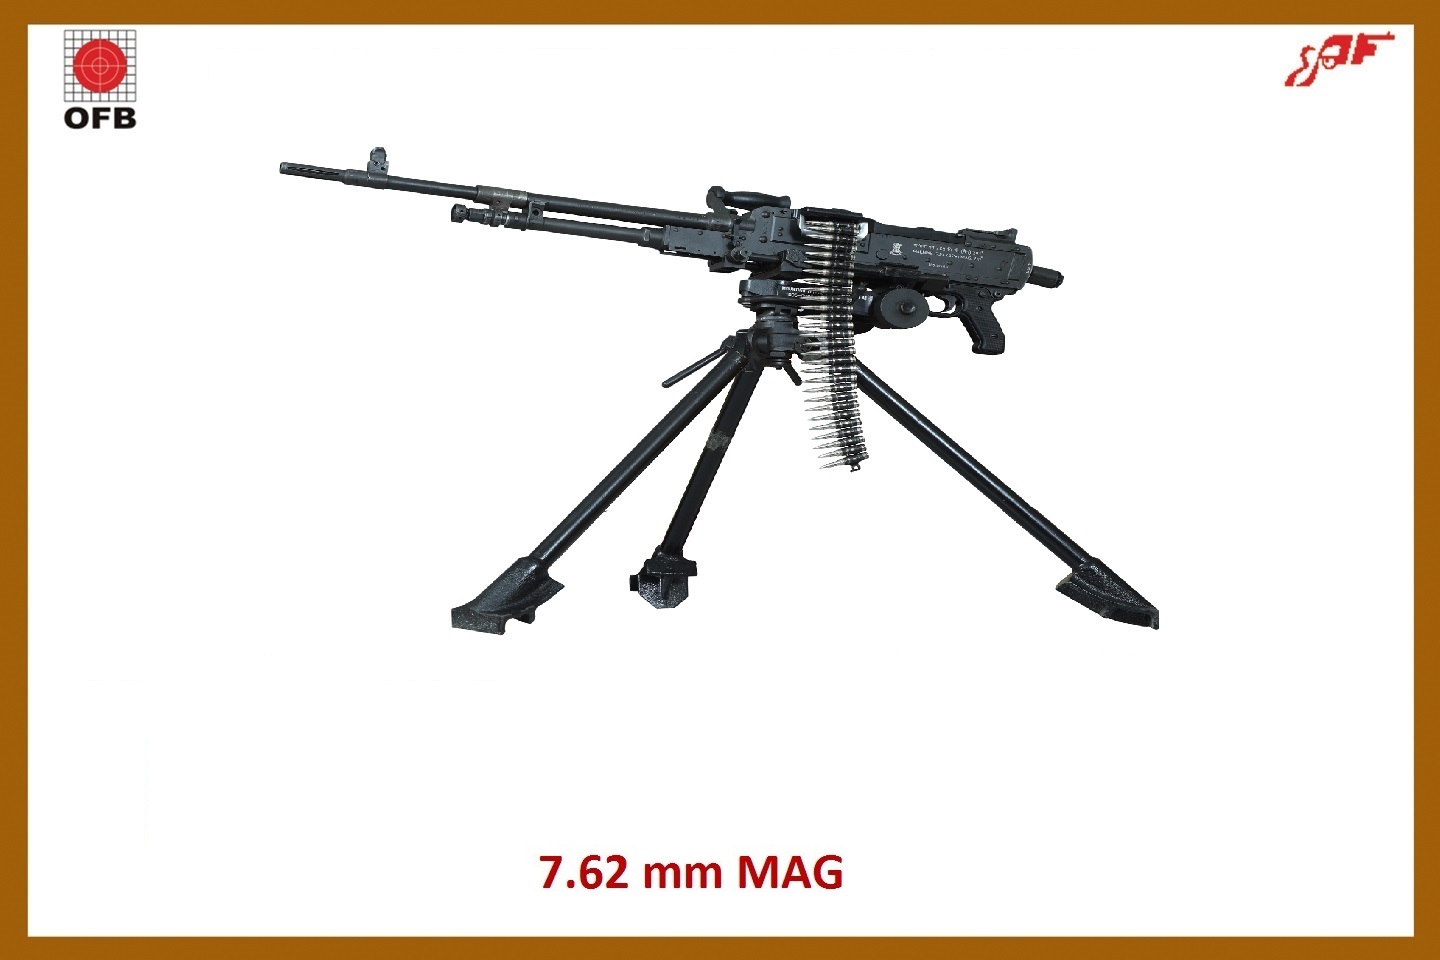 MACHINE GUN 7.62 MM (MAG) 2A1 WITH CES & WITH LIGHT BARREL ASSY, Directorate of Ordnance (Coordination and Services)